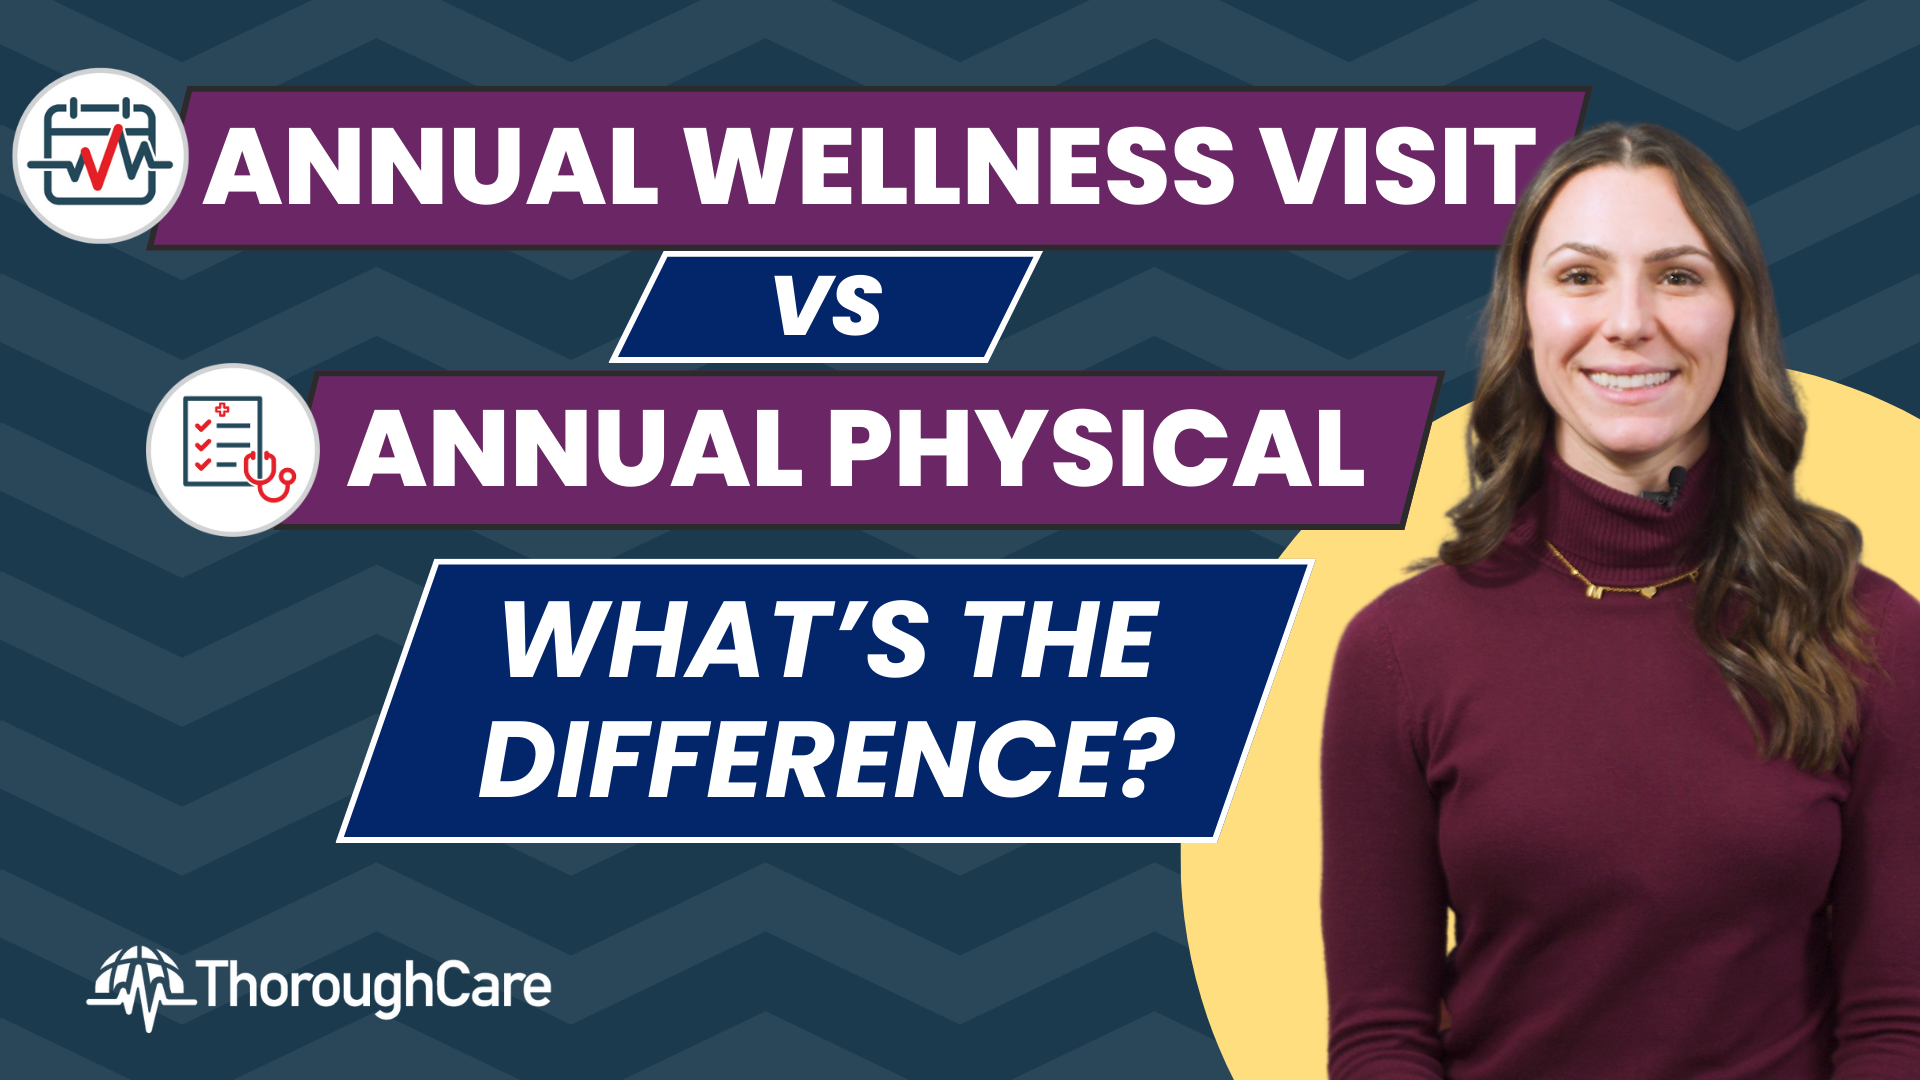 Annual Wellness Visit vs Annual Physical: What's the Difference